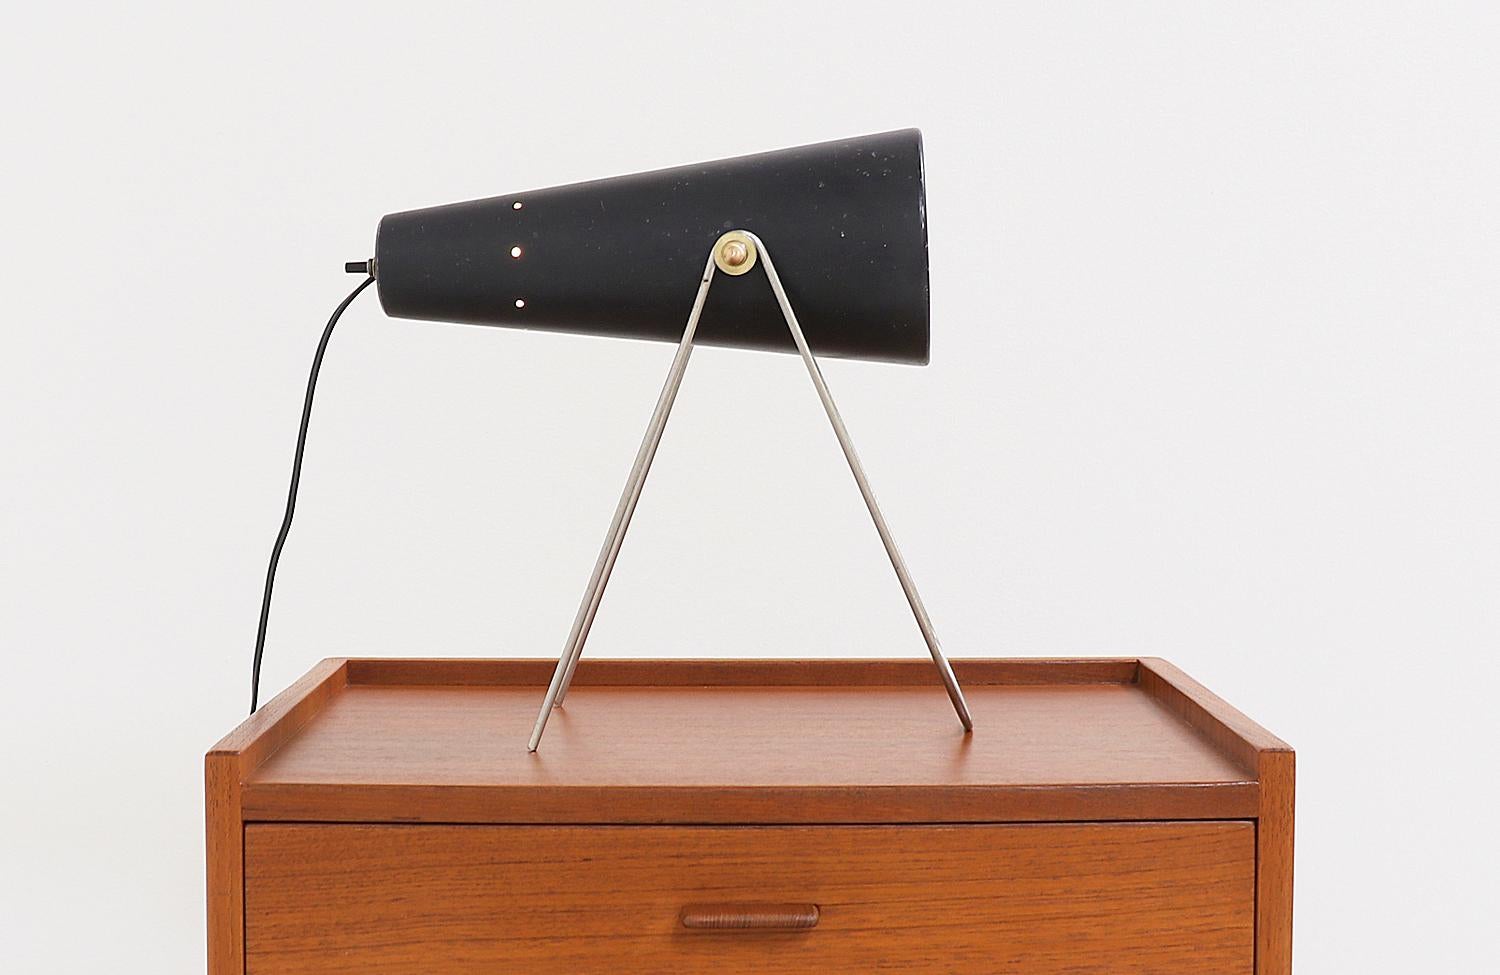 Enameled California Modernist Table Lamp by Vincent Cilurzo